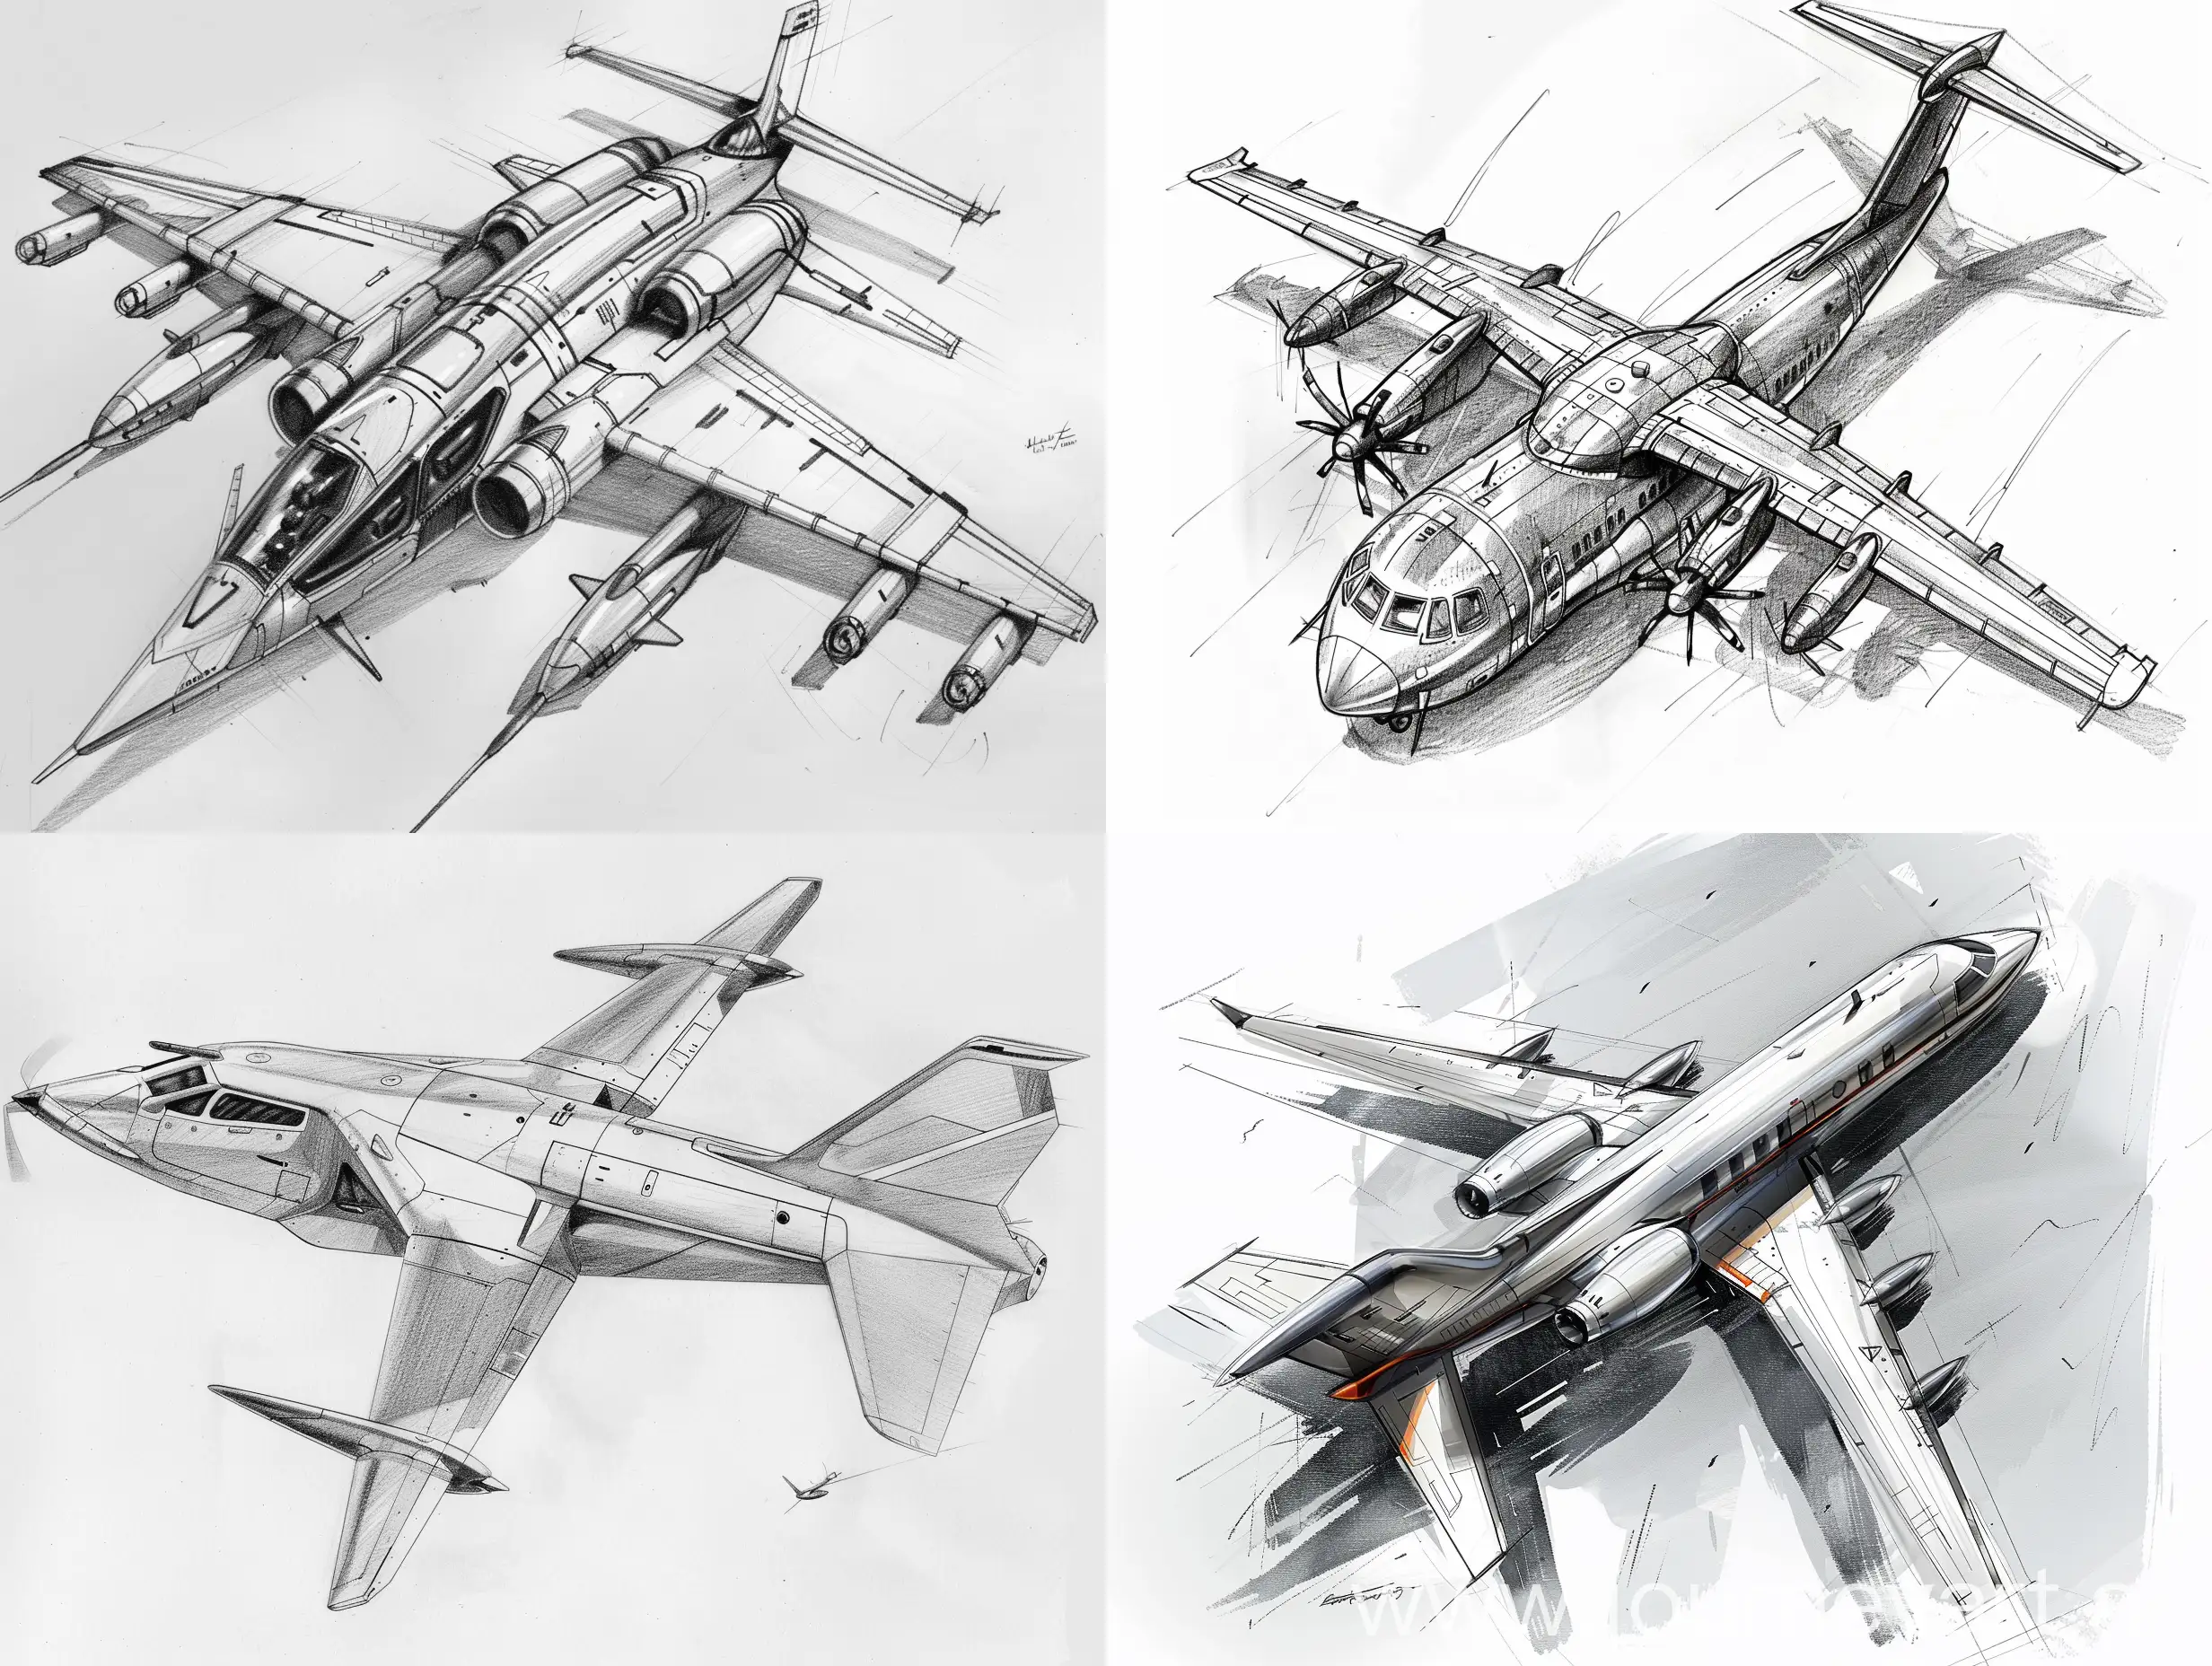 Futuristic-SixWinged-Plane-Flying-in-Modern-Sky